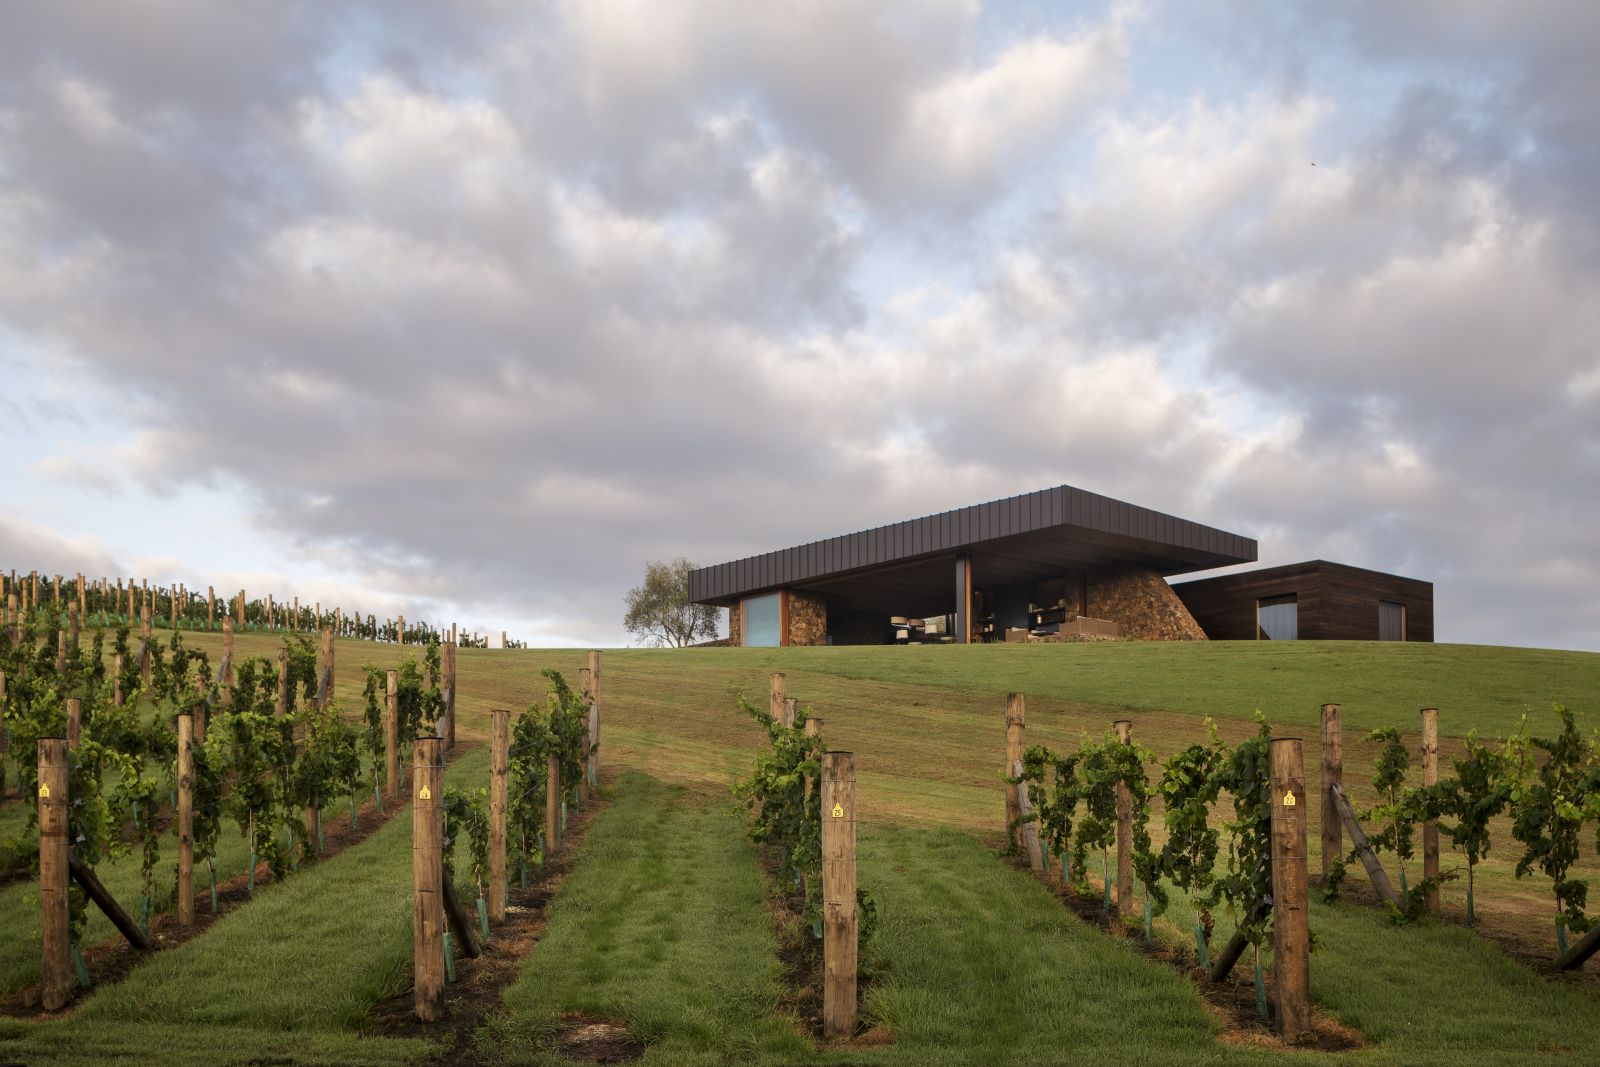 The Landing New Zealand The Vineyard exterior with grapevines in front